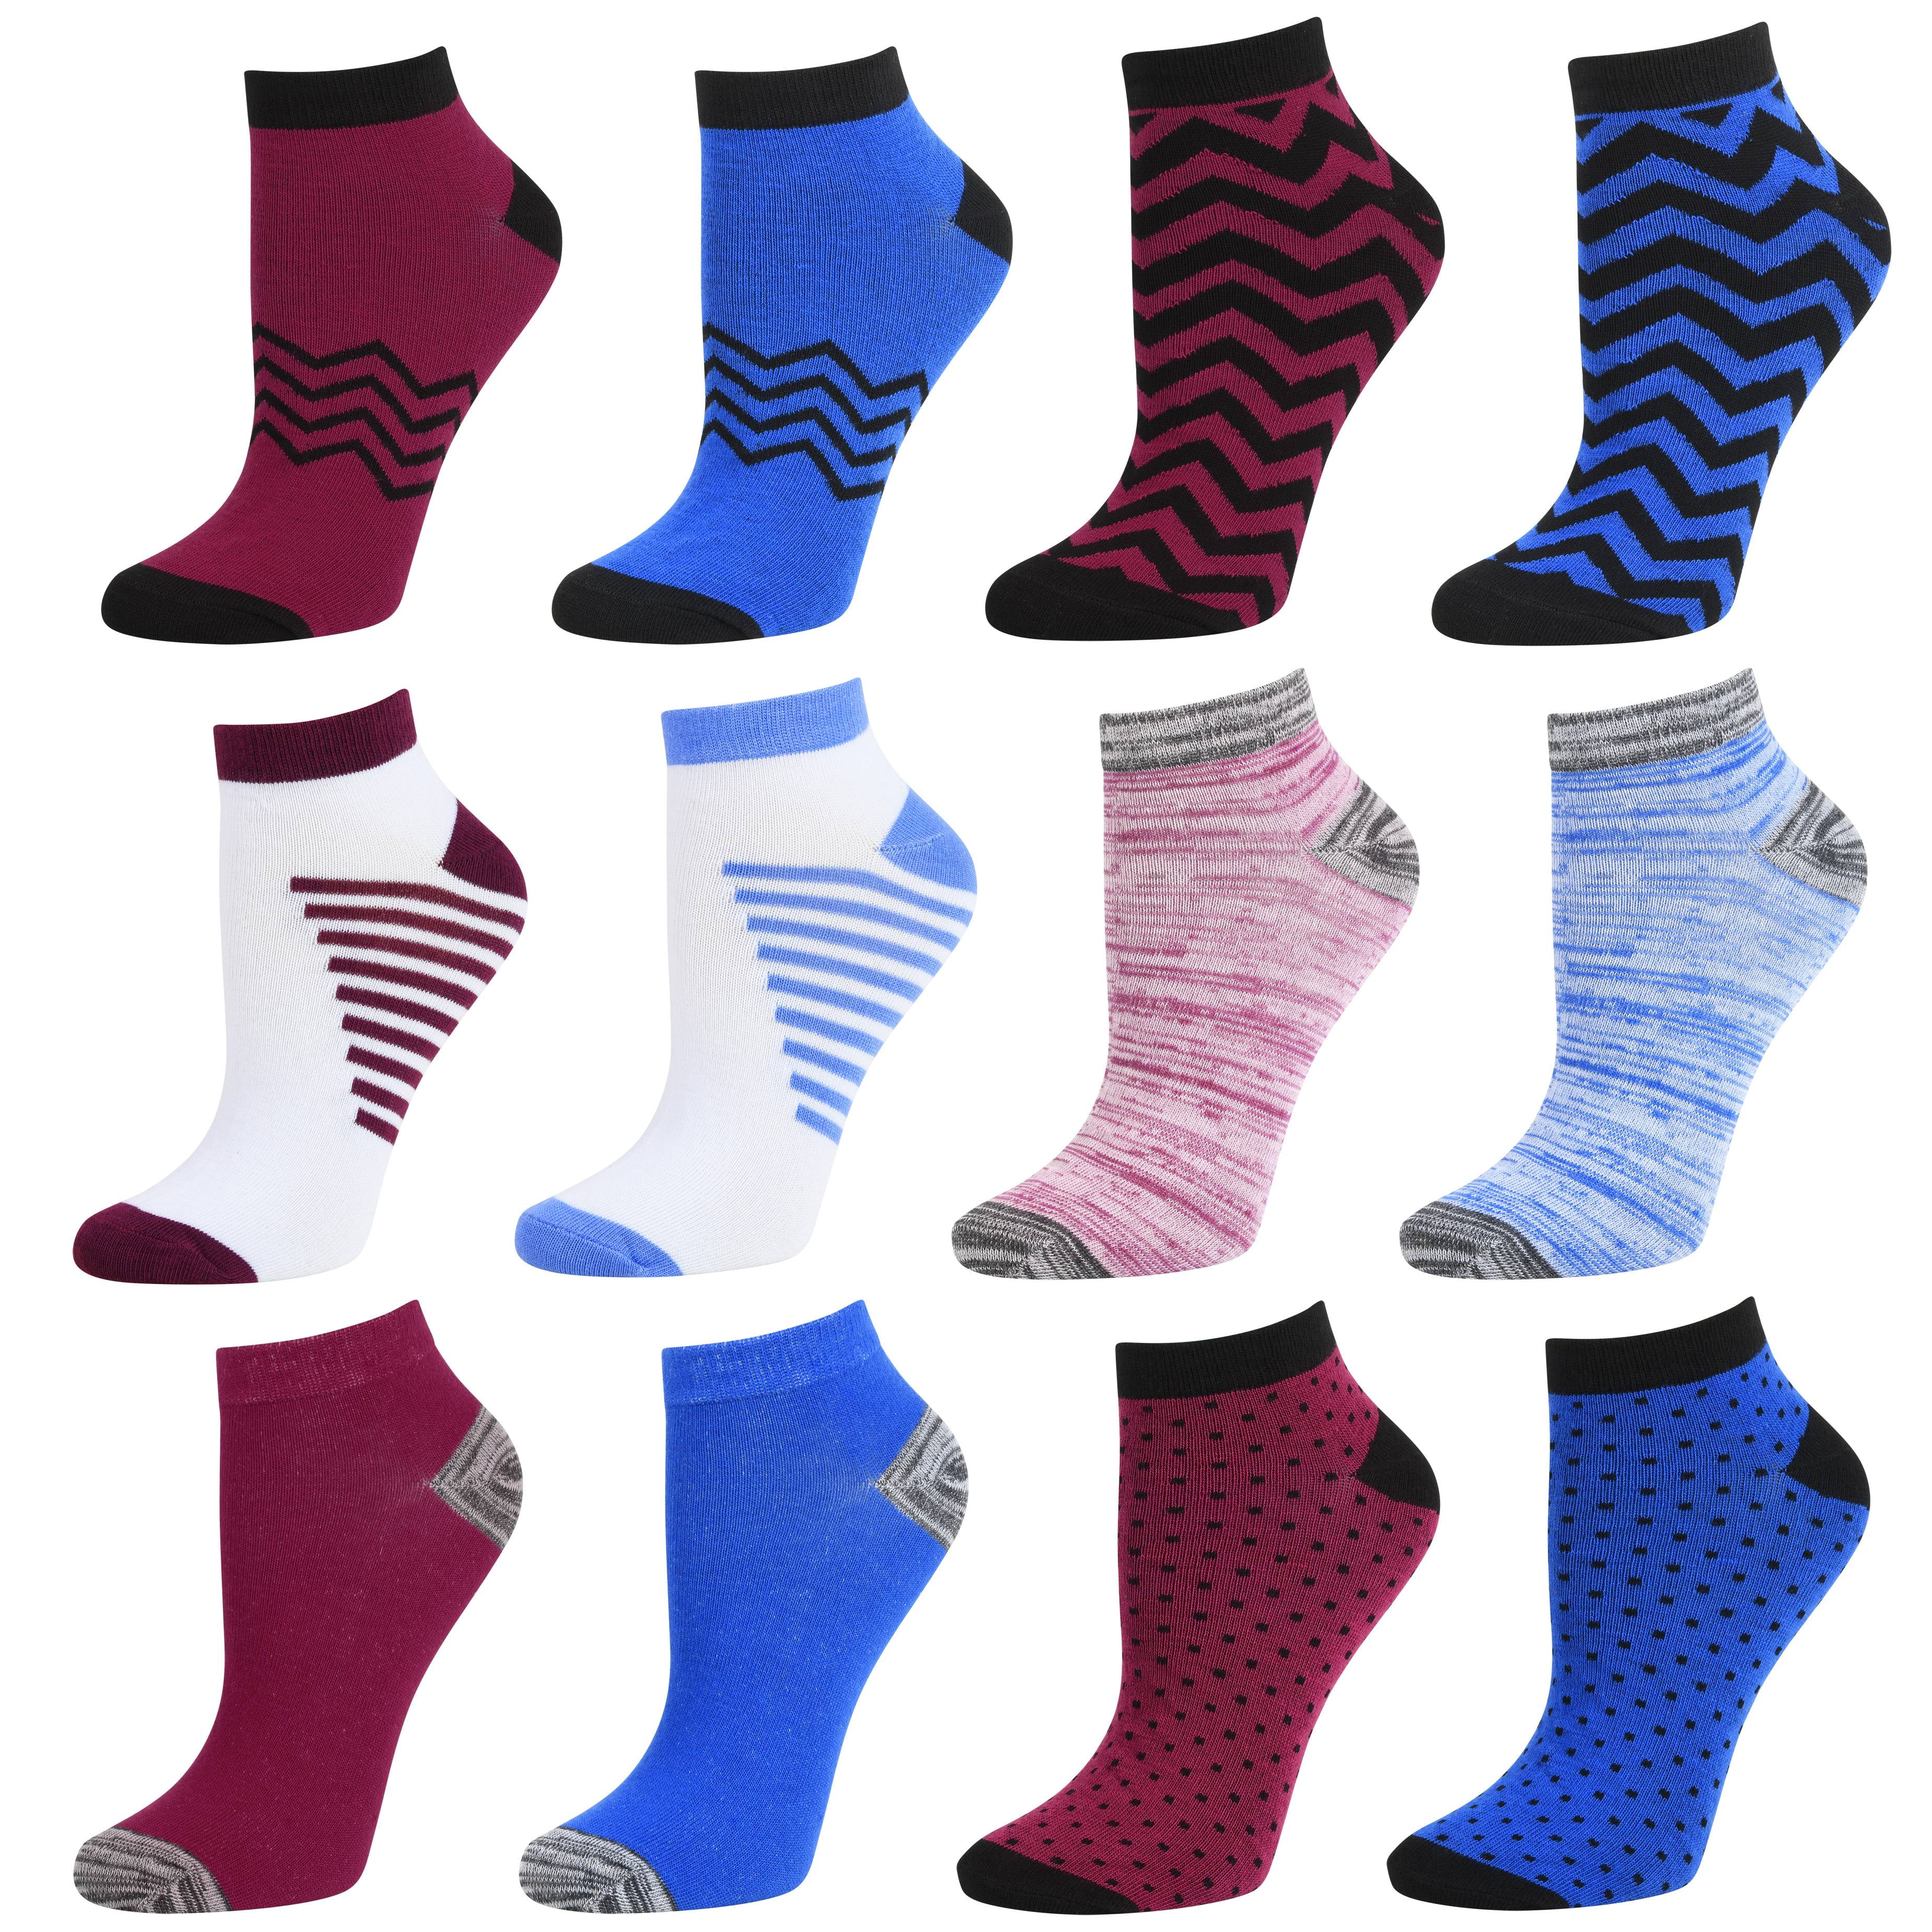 Debra Weitzner Womens Low-Cut Socks Colorful Casual No-Show Ankle Socks 12 Pairs 